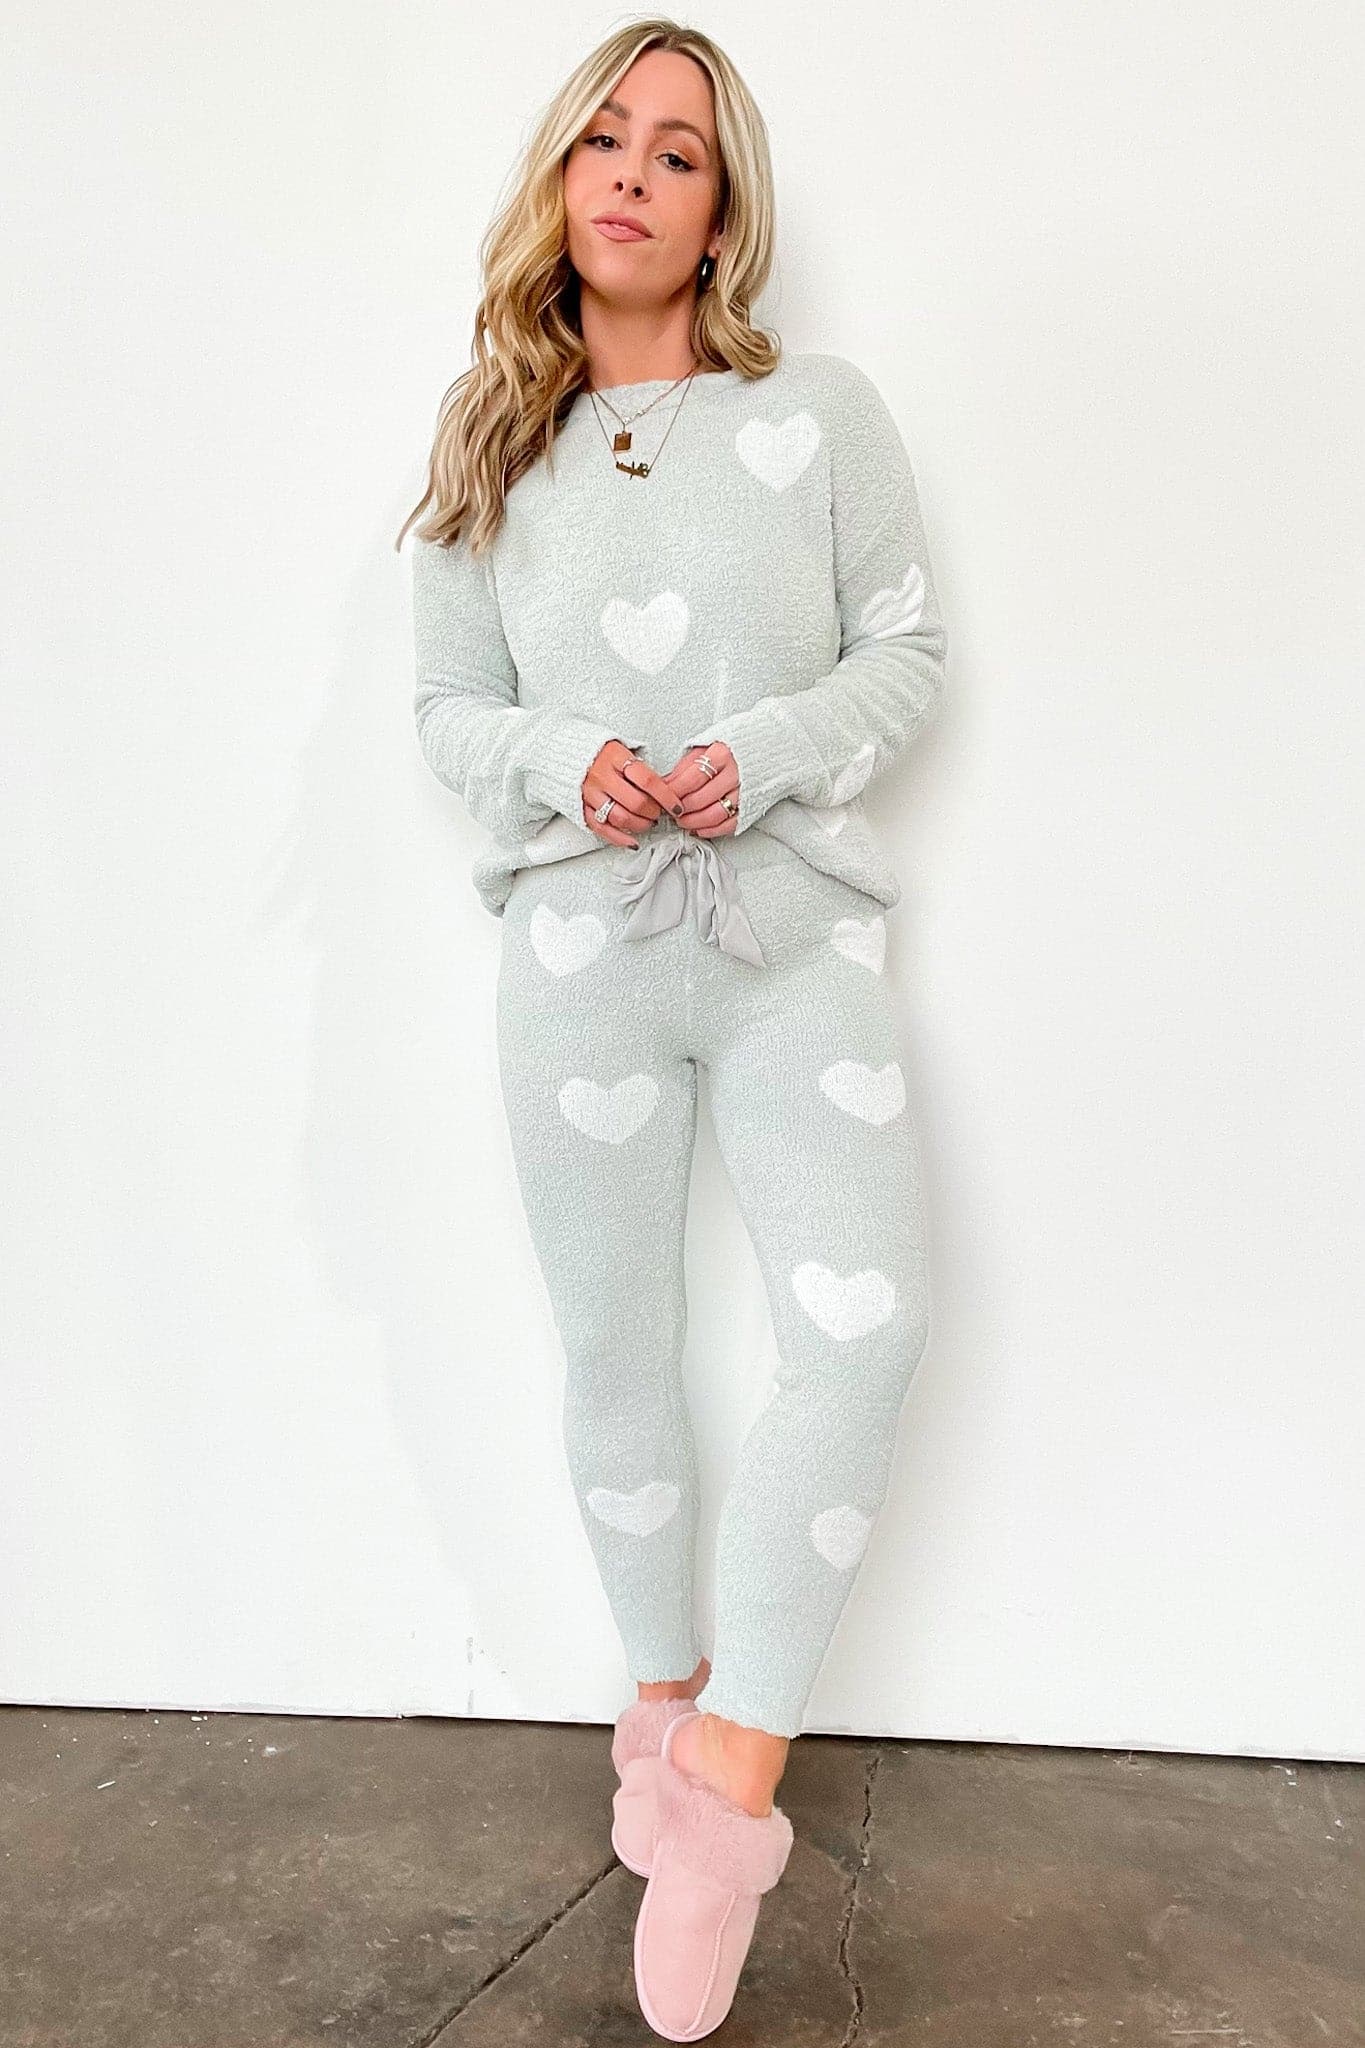  Have a Heart to Heart Print Sweater Knit Leggings - FINAL SALE - Madison and Mallory